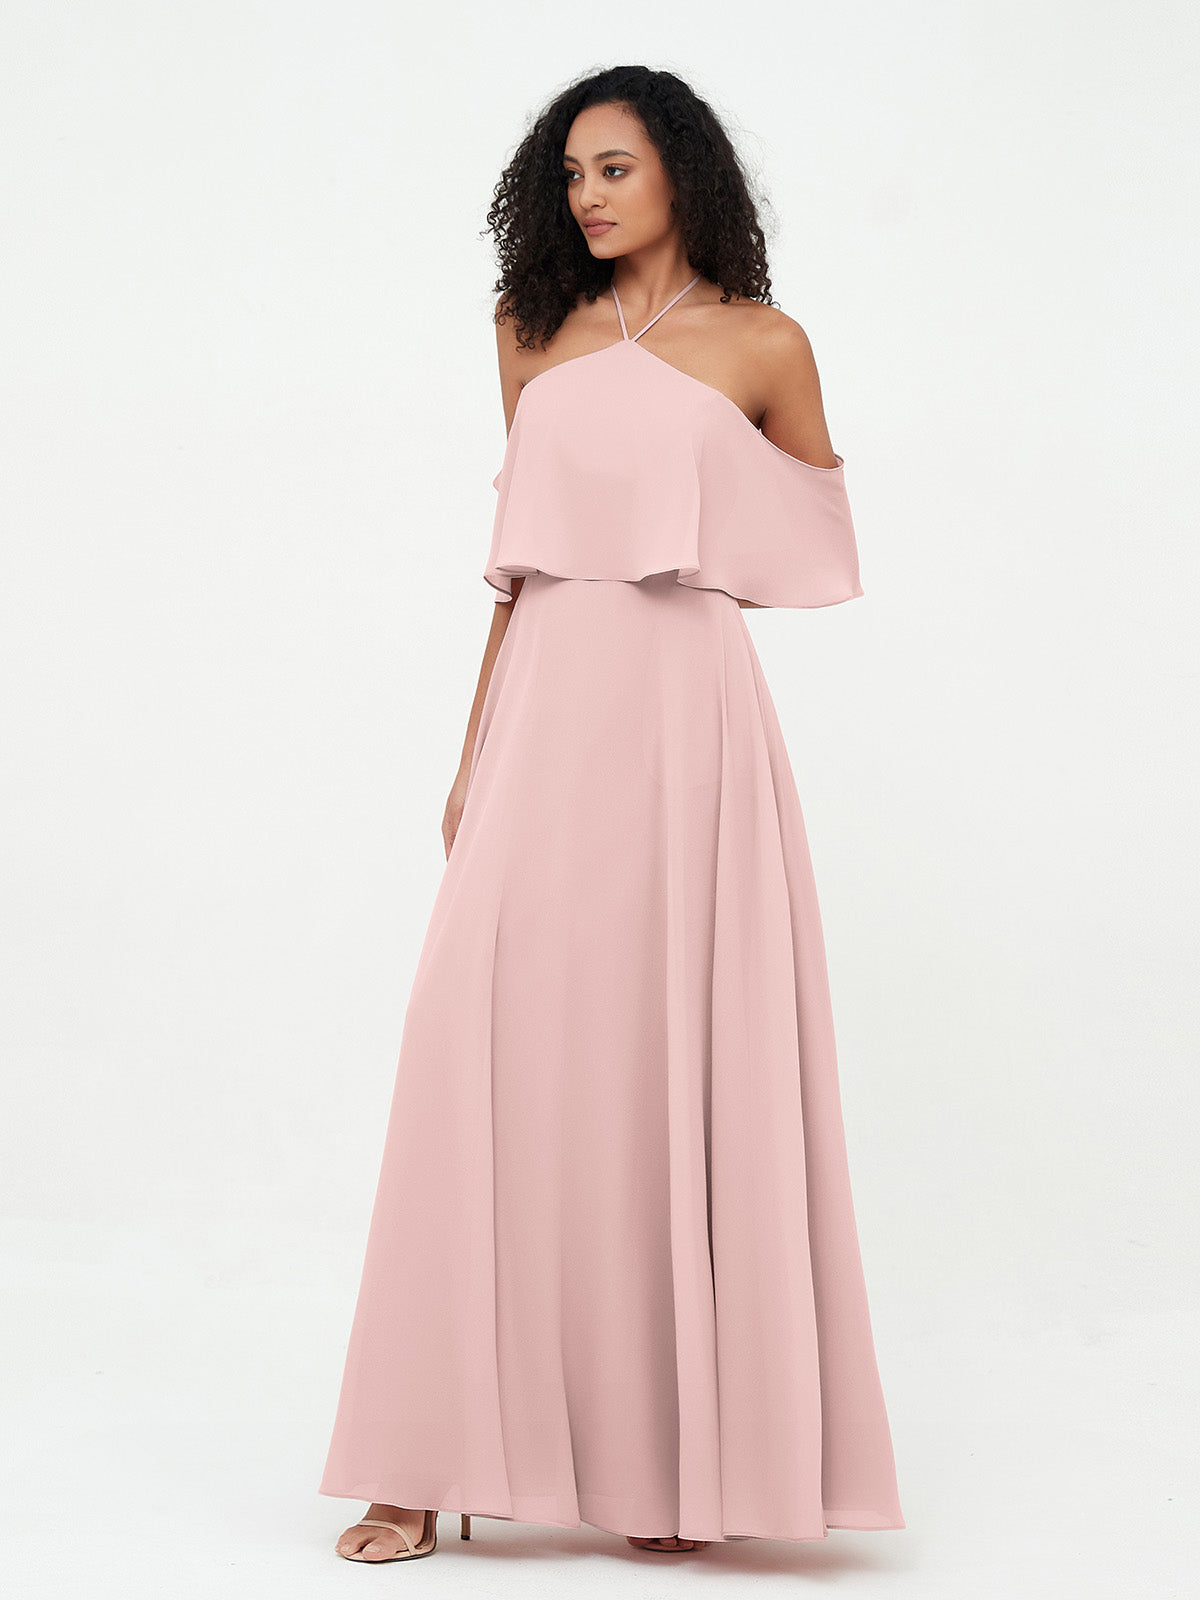 Halter Off the Shoulder Max Dresses with Pockets-Dusty Rose